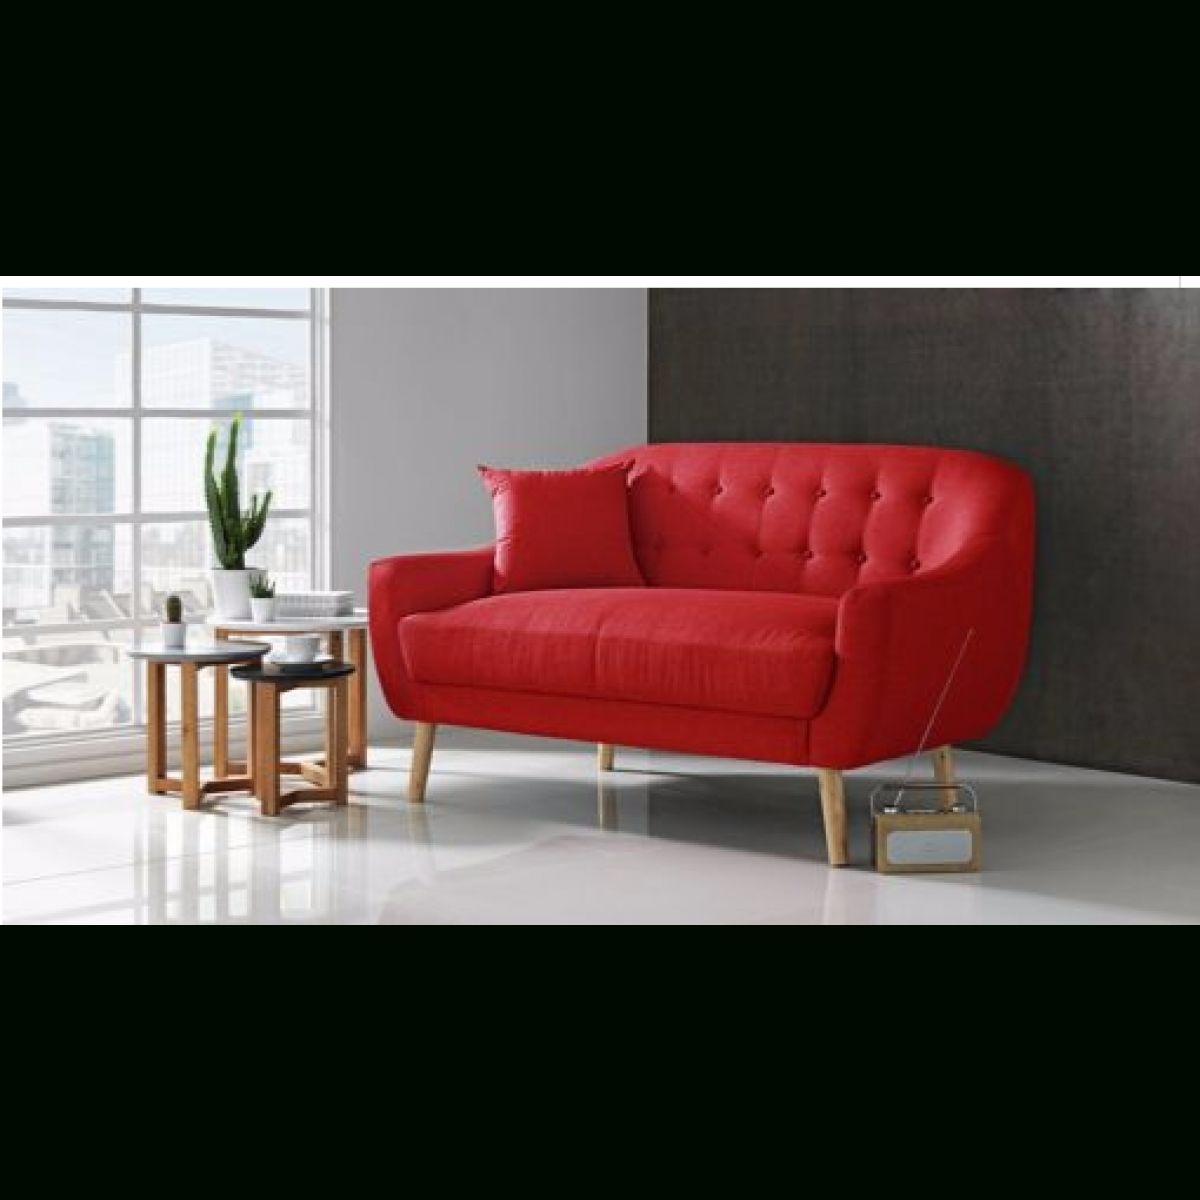 Hygena Lexie Retro Compact Fabric 2 Seater Sofa – Poppy Red Intended For Retro Sofas (Photo 4 of 10)